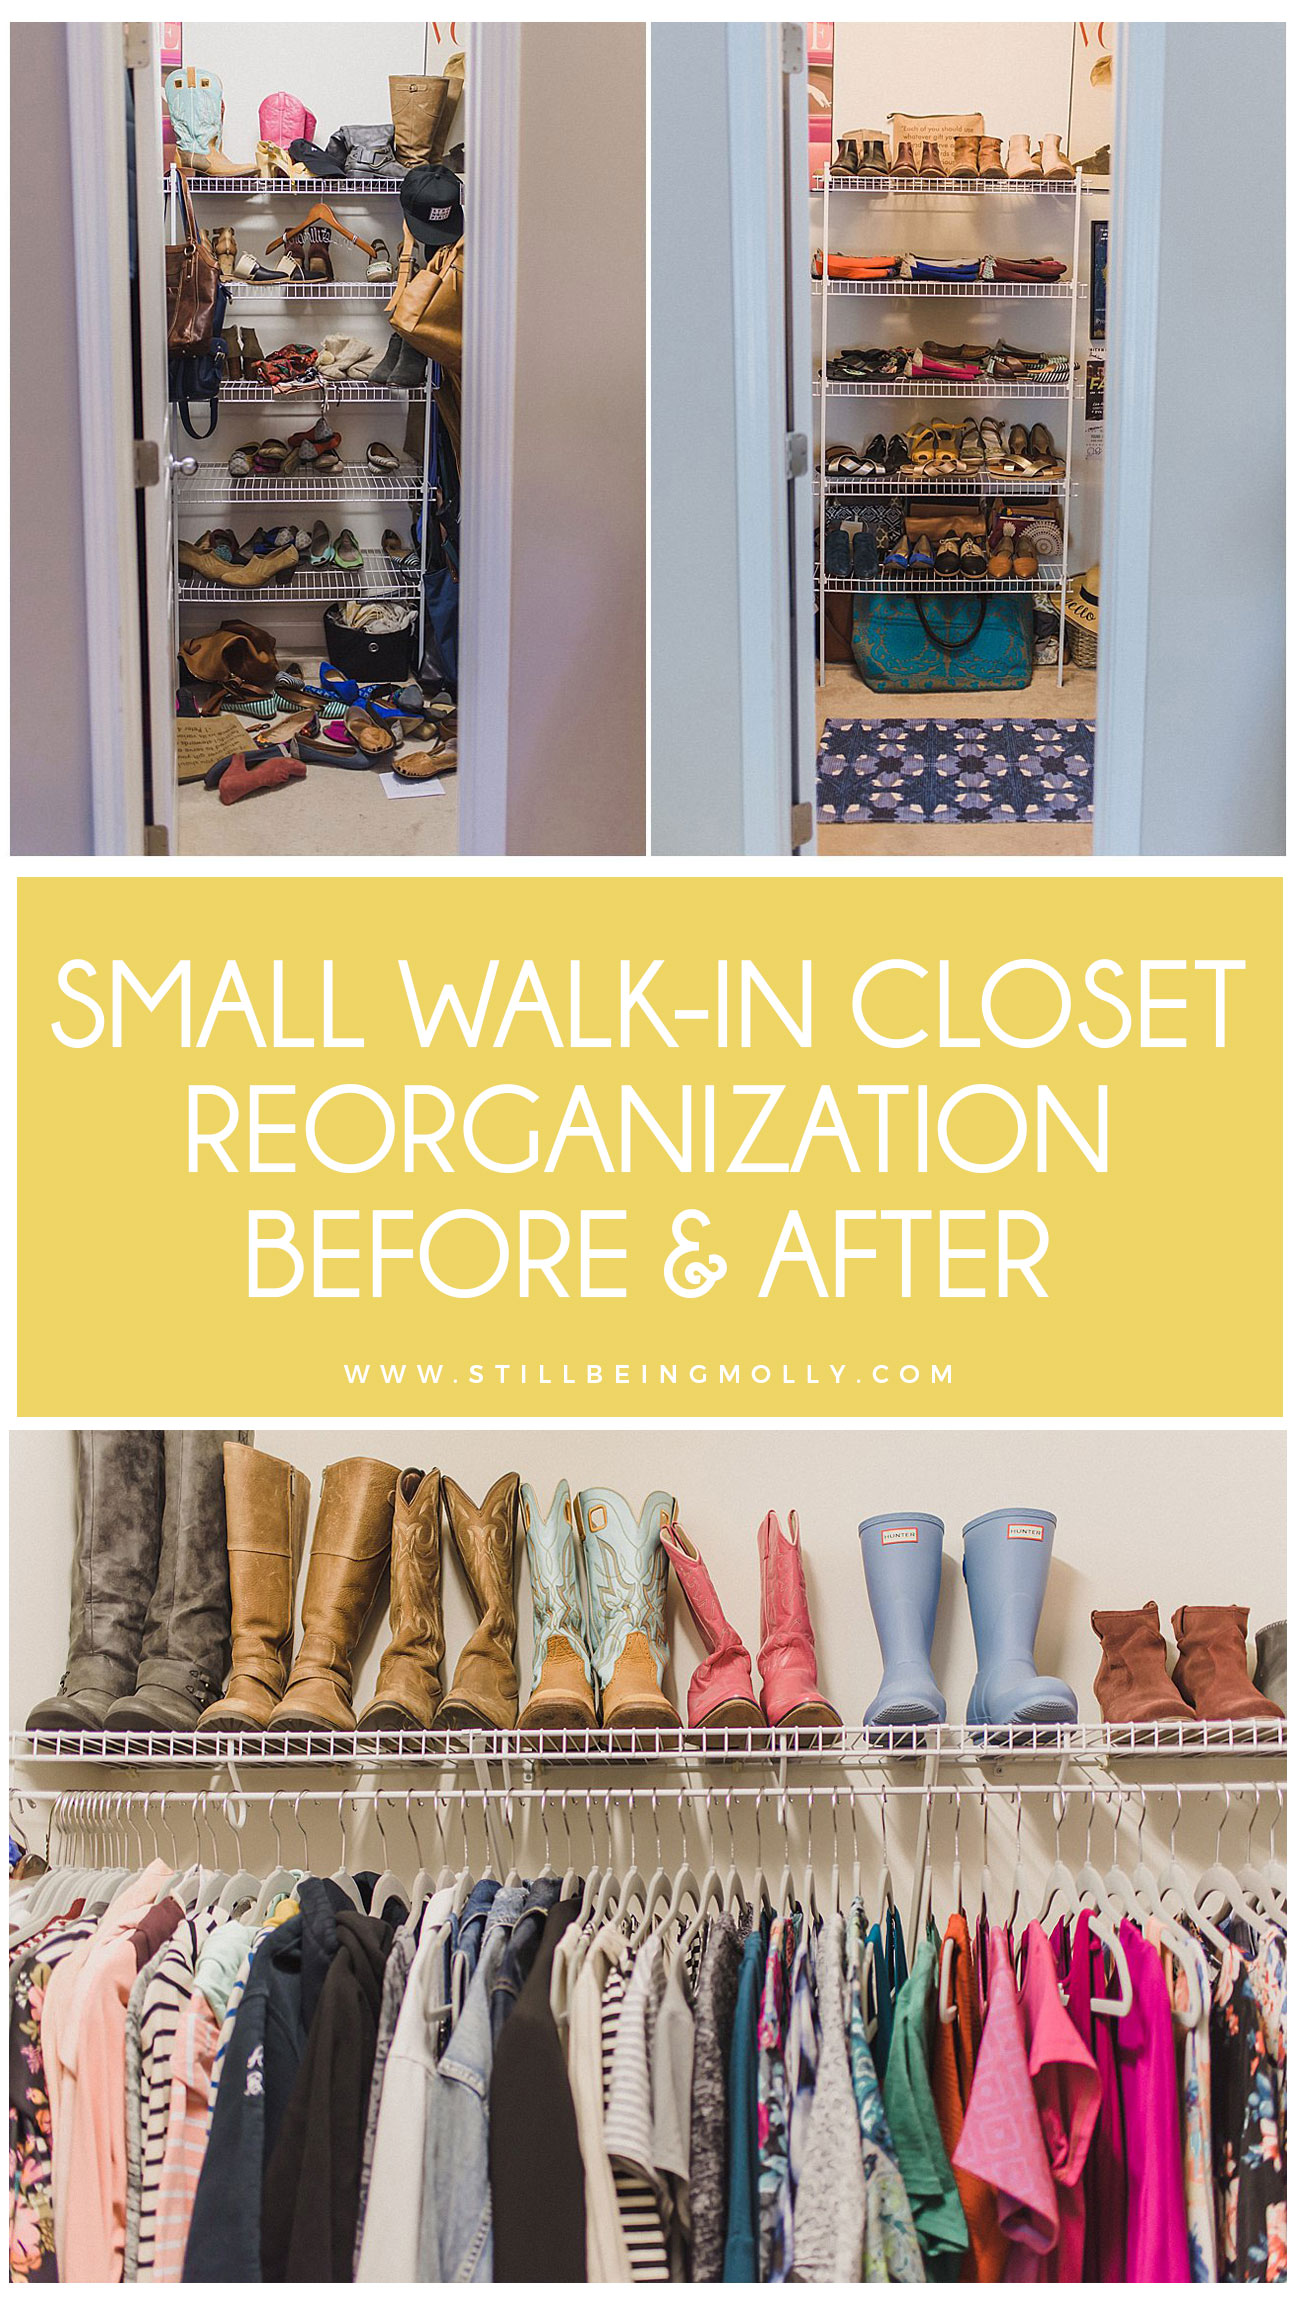 Small Walk-In Closet Organization Before and After (13)